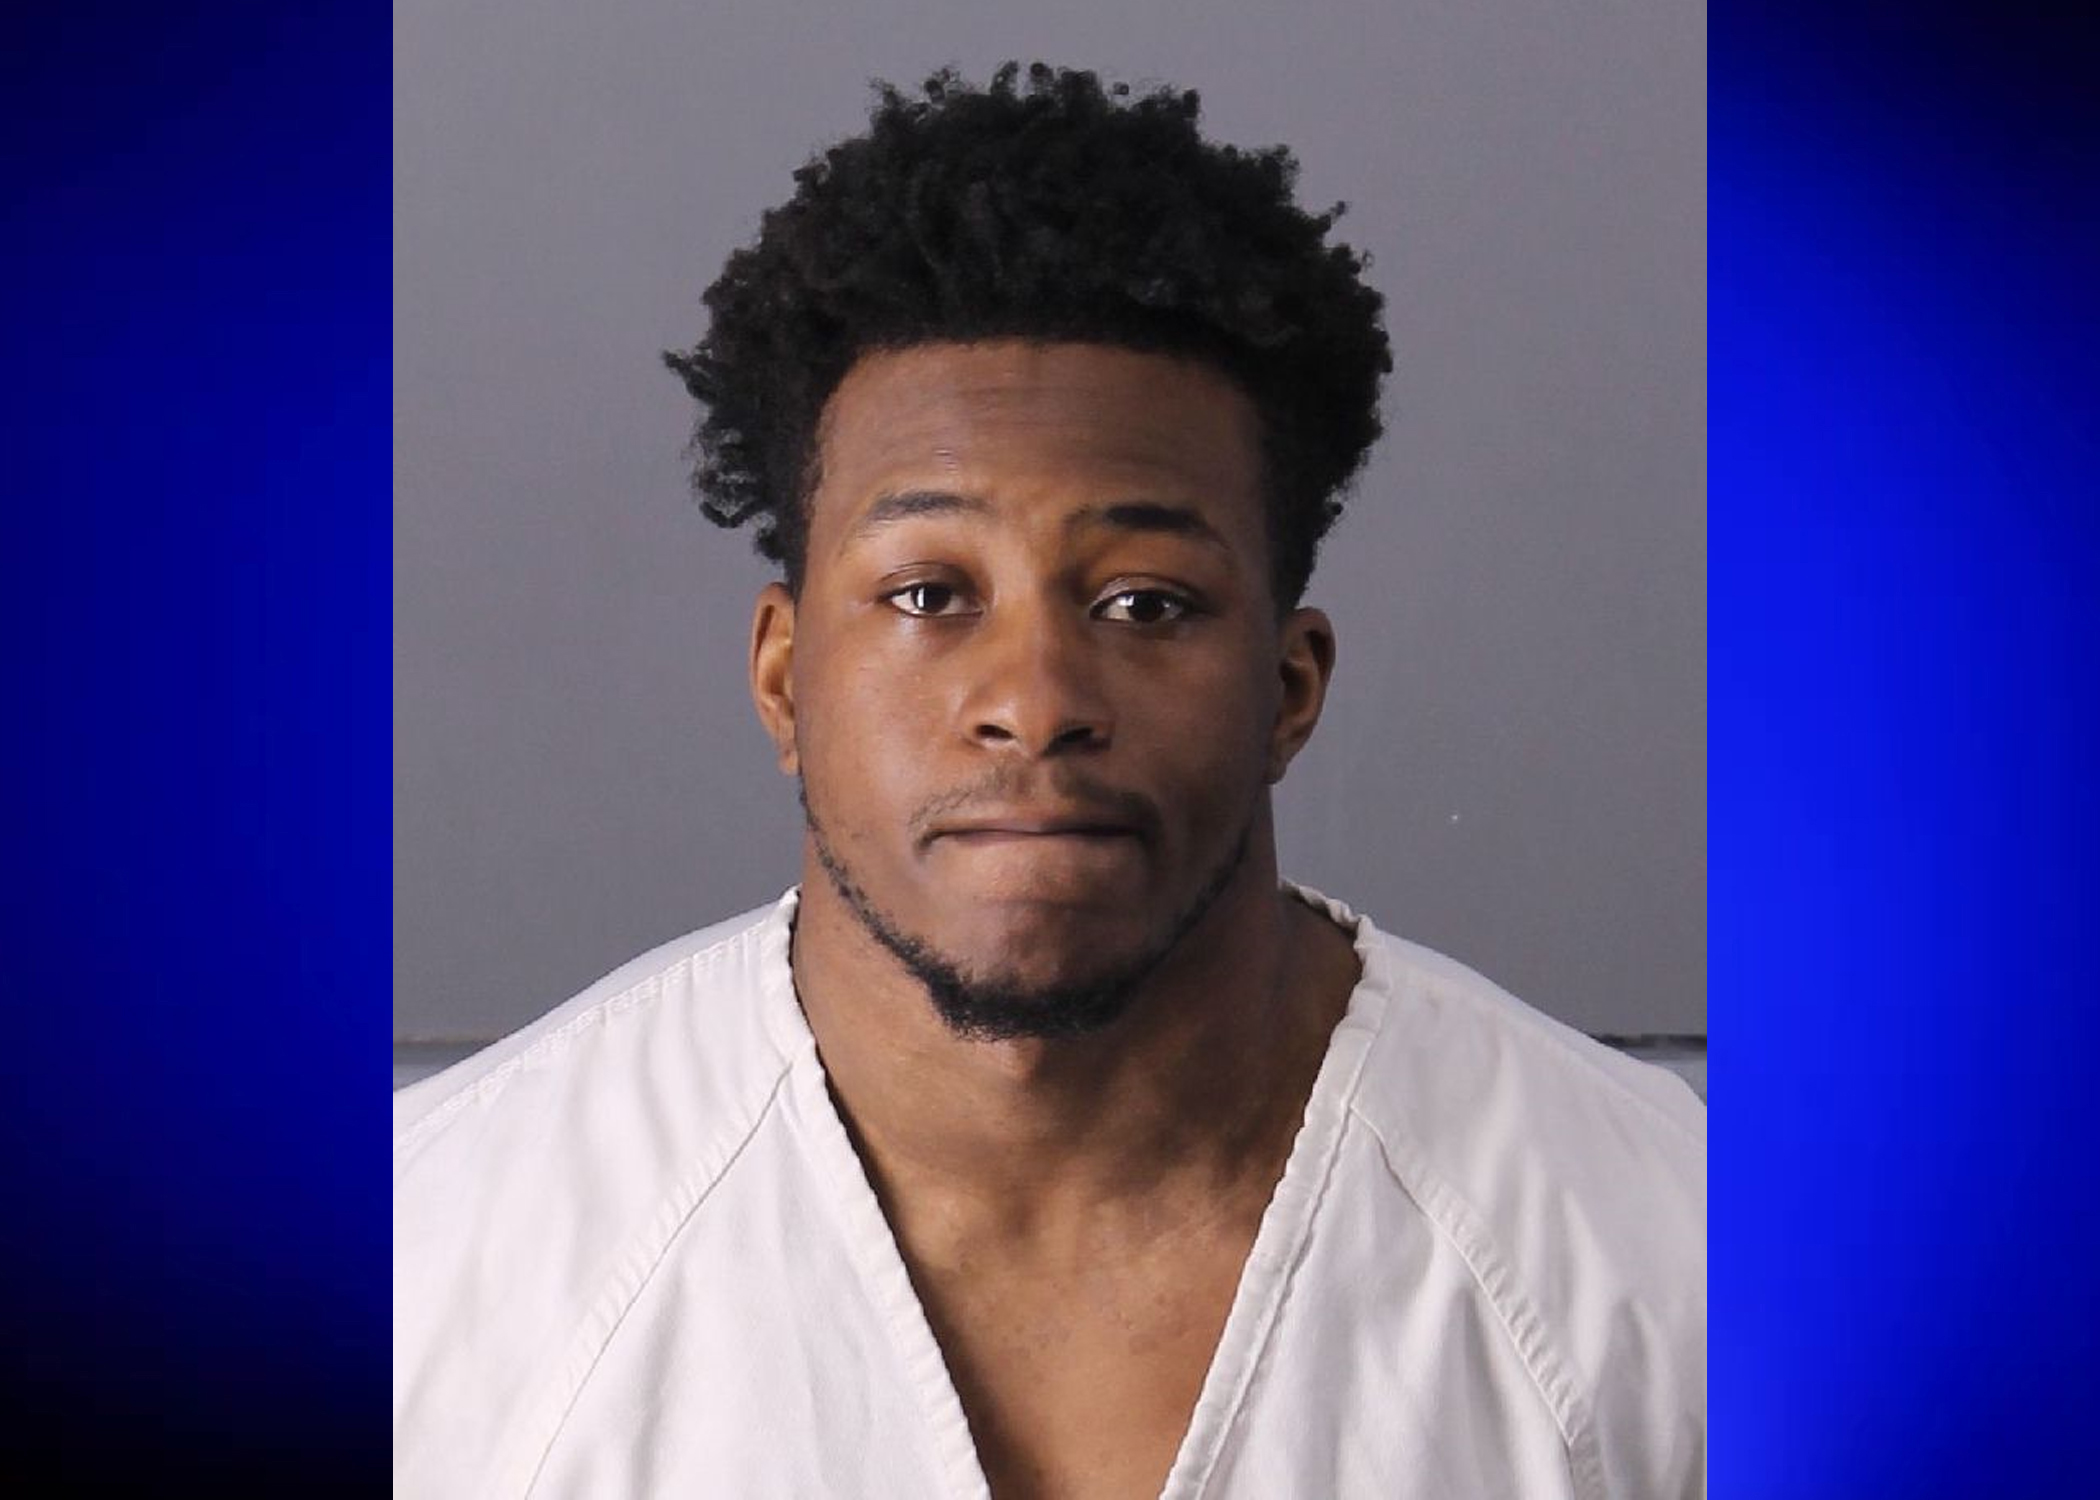 BREAKING: Man charged with capital murder in shooting death of 20-year-old Destiny Washington